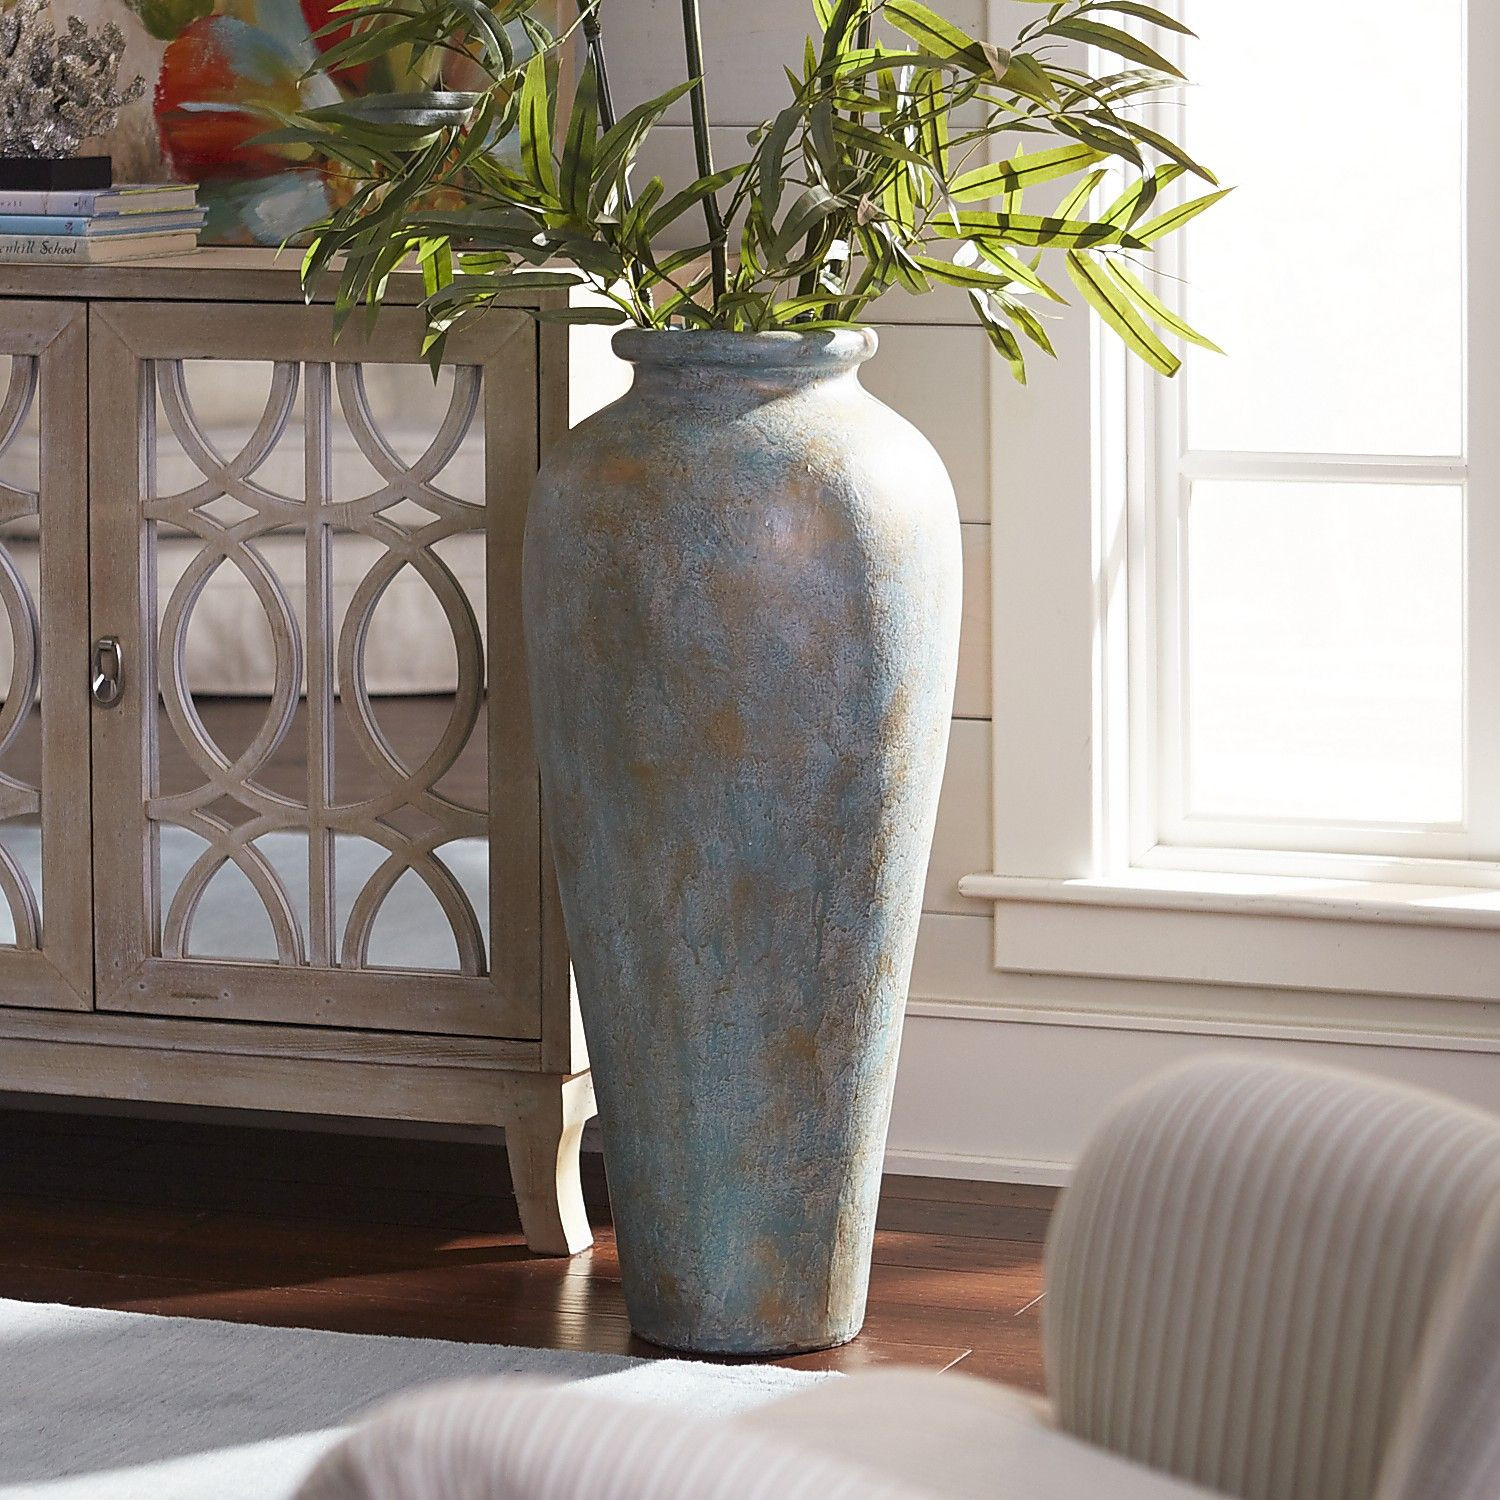 Extra Large Silver Vase Of Blue Green Patina Urn Floor Vase Products Pinterest Flooring within Blue Green Patina Urn Floor Vase